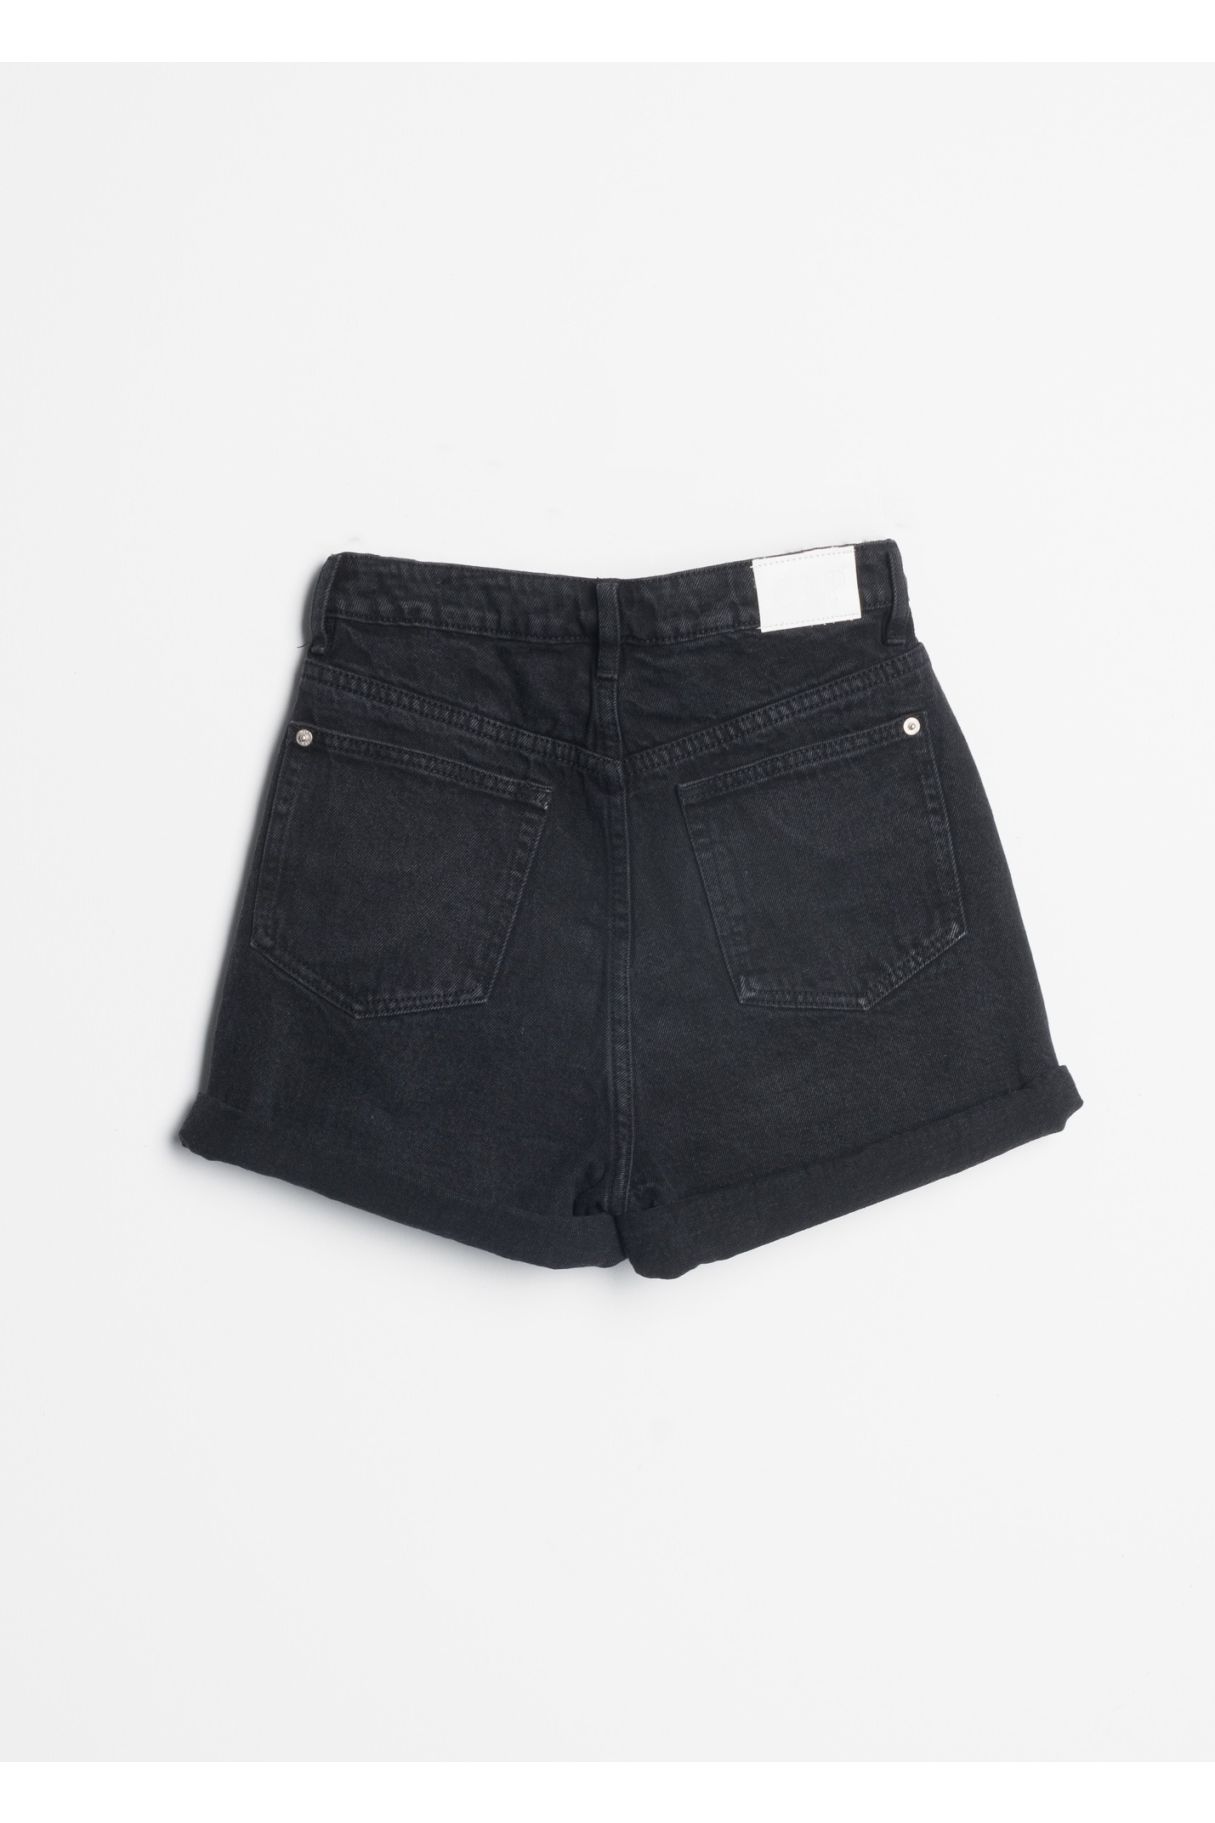 MOM FIT JEANS SHORTS